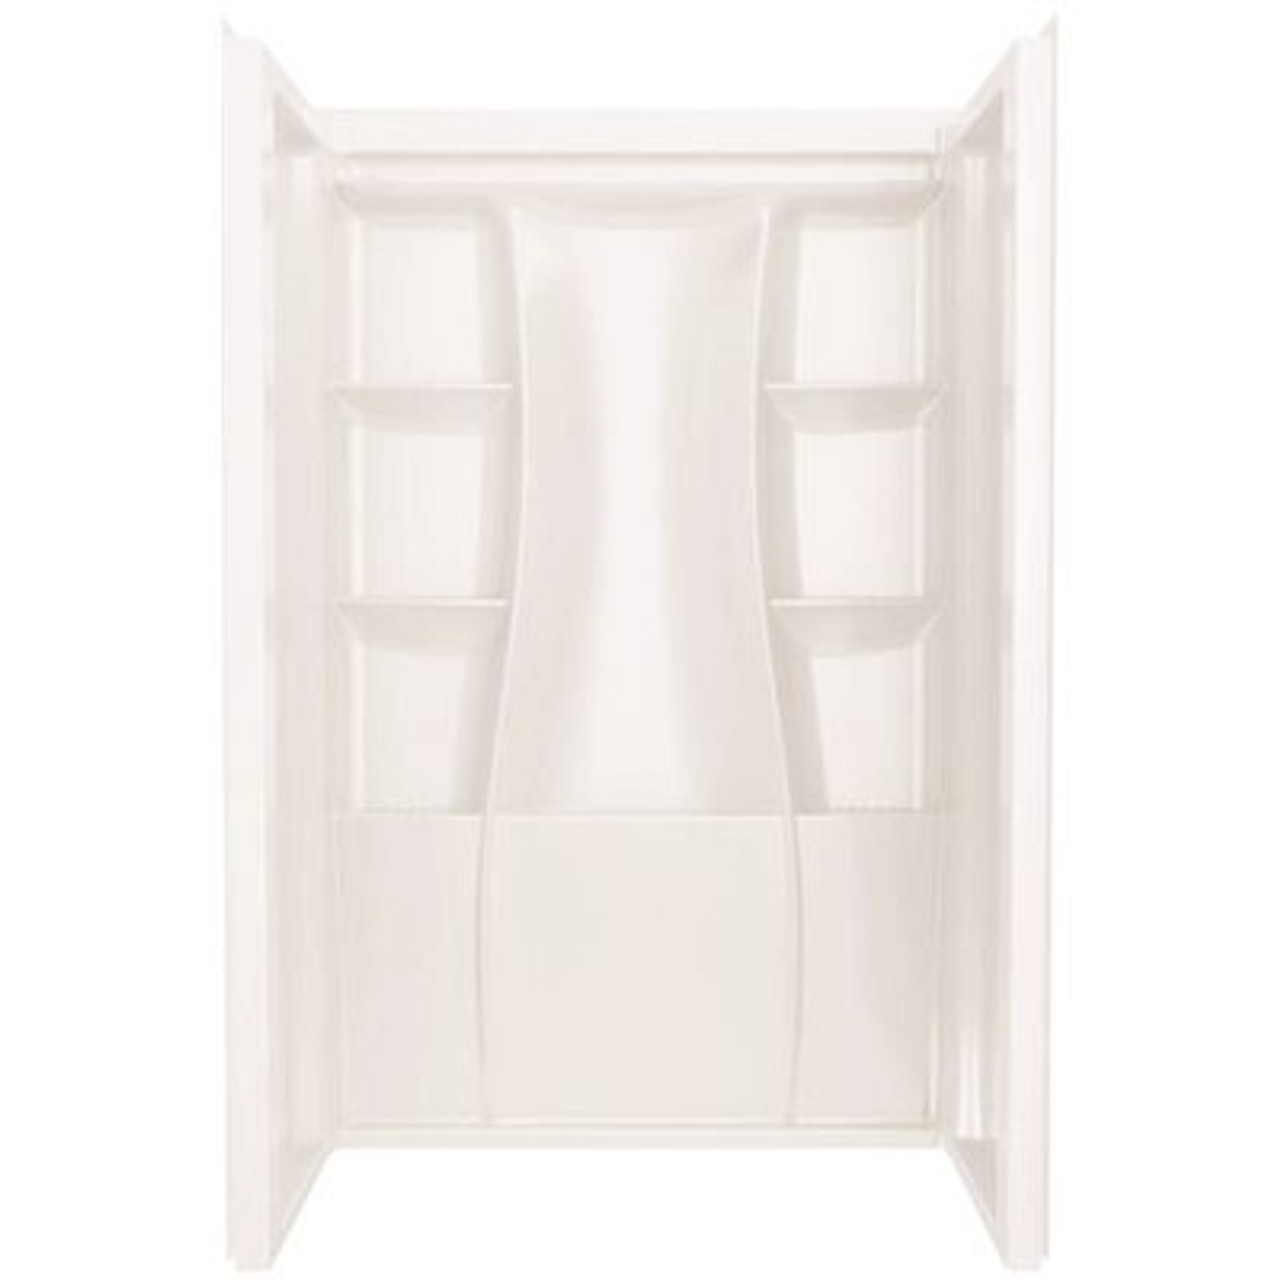 Delta Classic 500 48 in. W x 73.25 in. H x 34 in. D 3-Piece Direct-to-Stud Alcove Shower Surrounds in High Gloss White